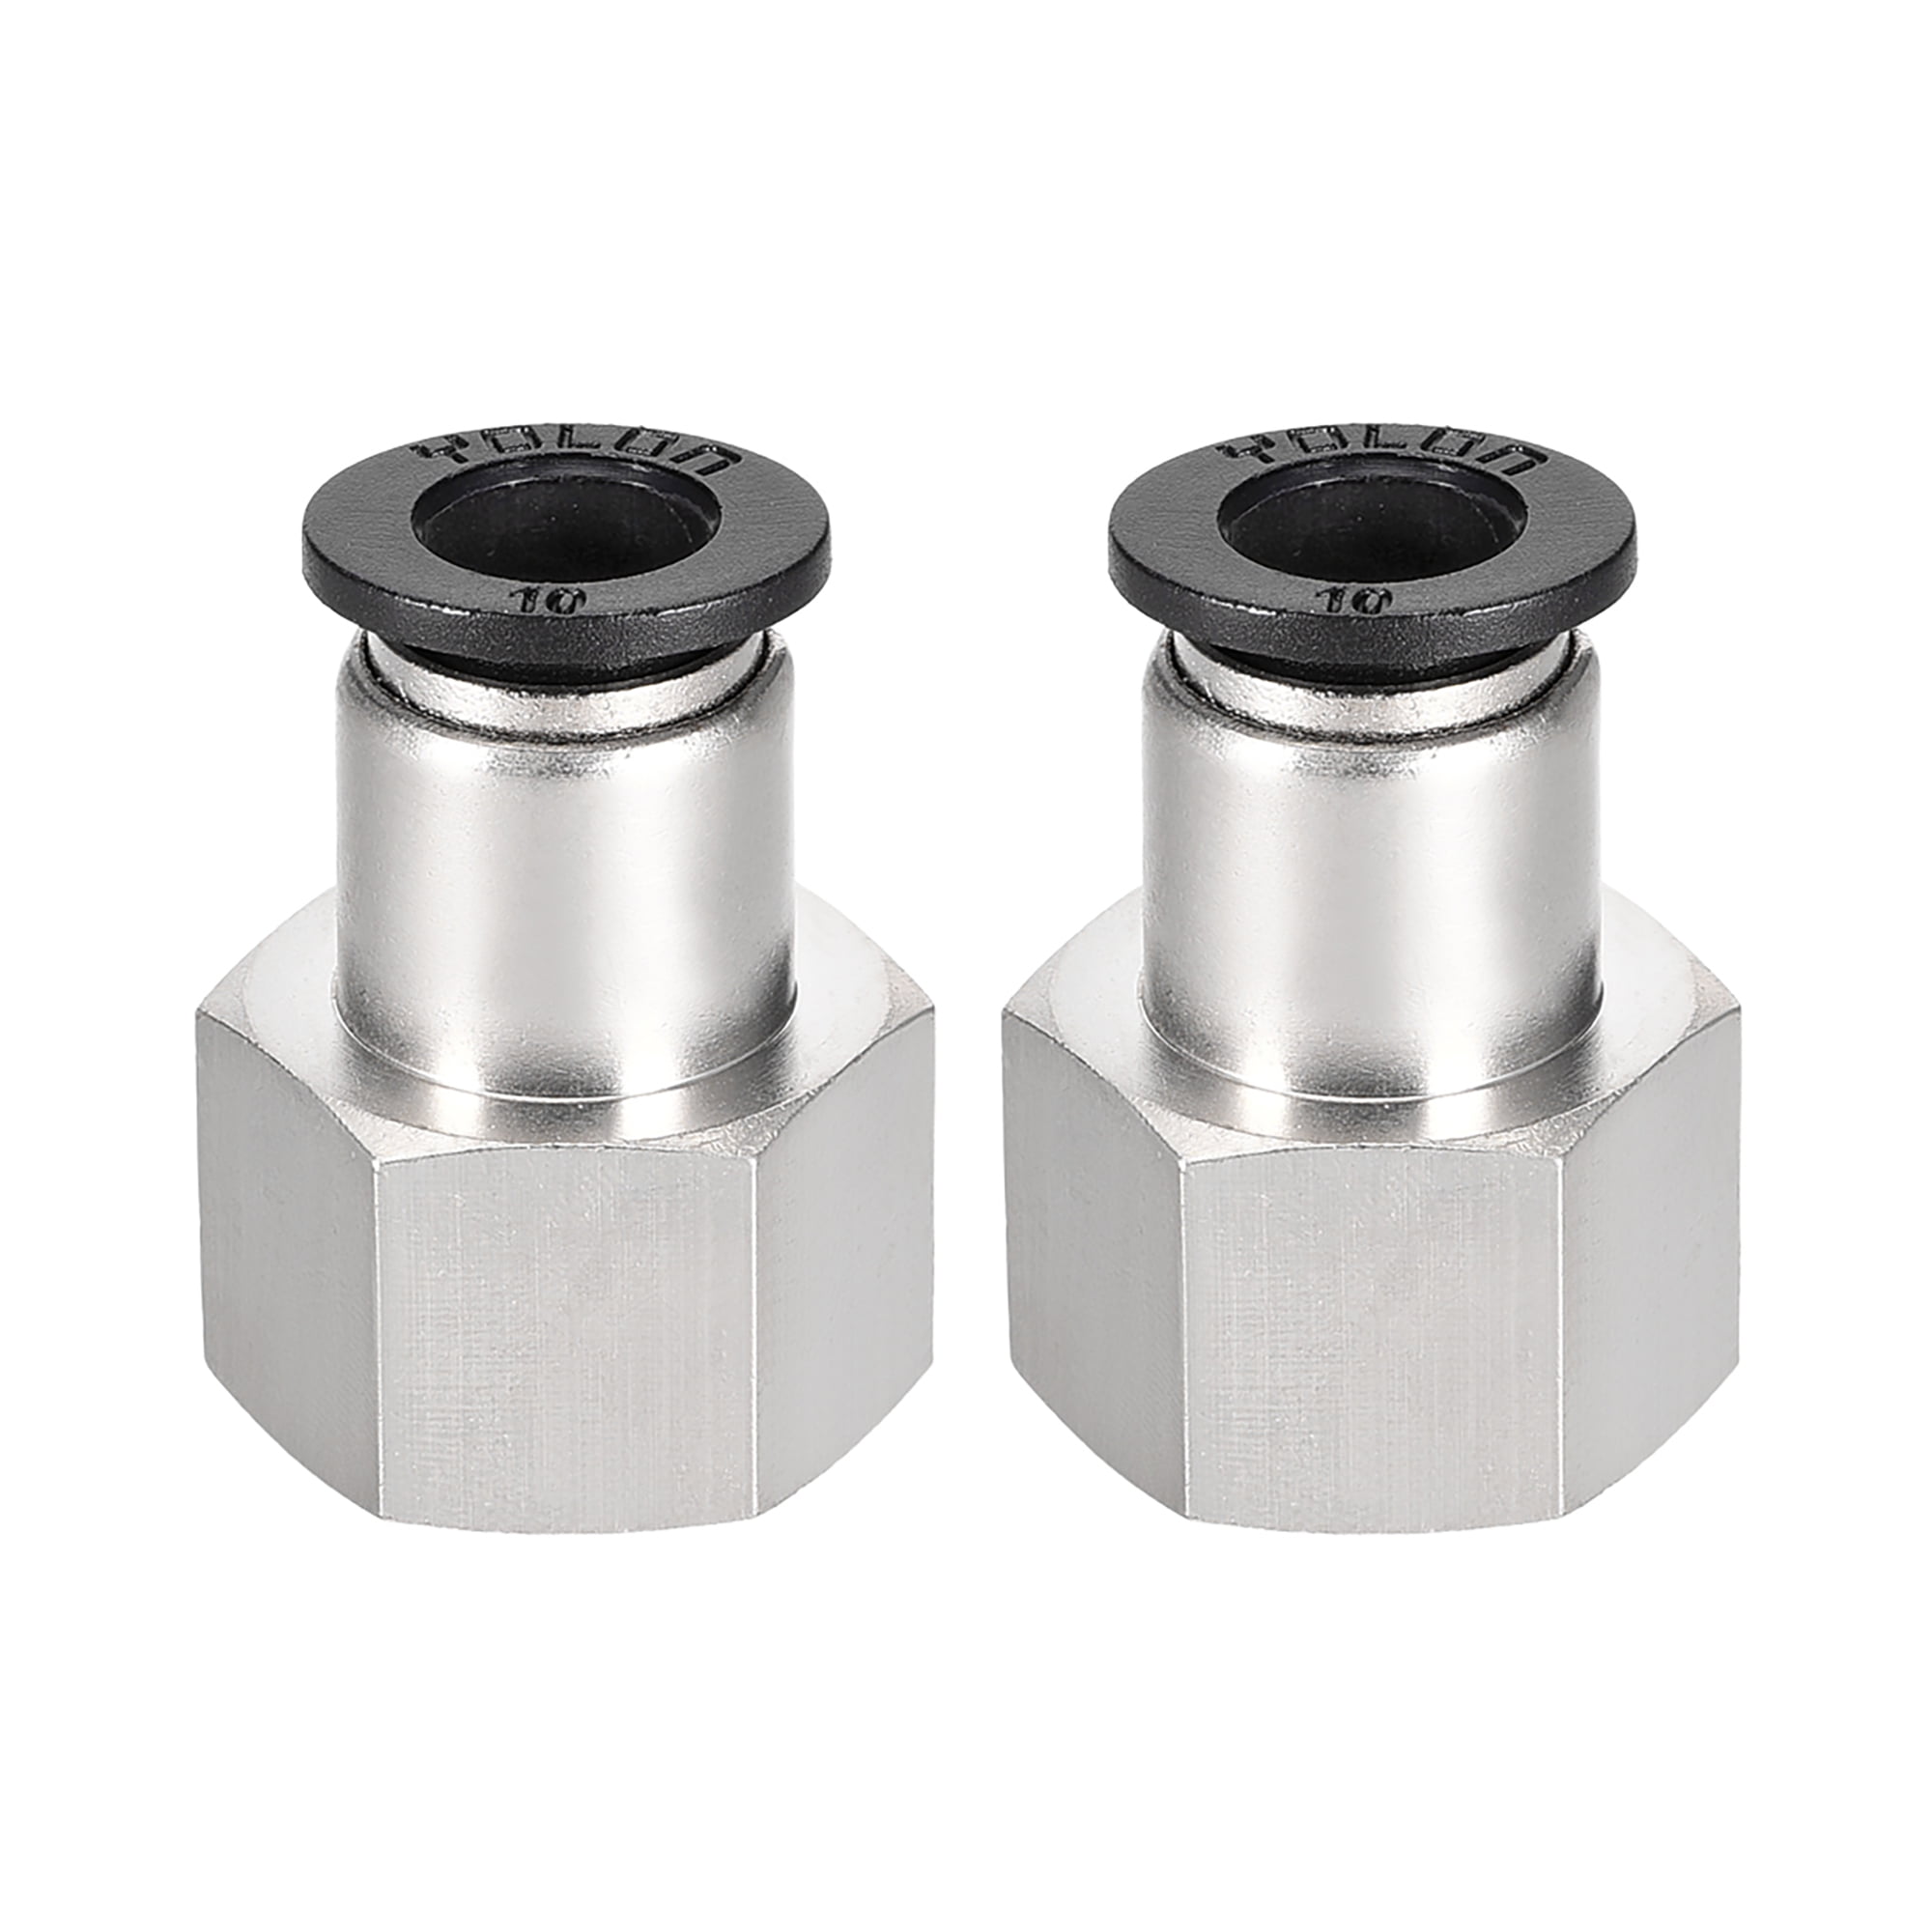 Pneumatic Tube Push In Fittings 10mm to 6mm Adapter 2 Pcs 